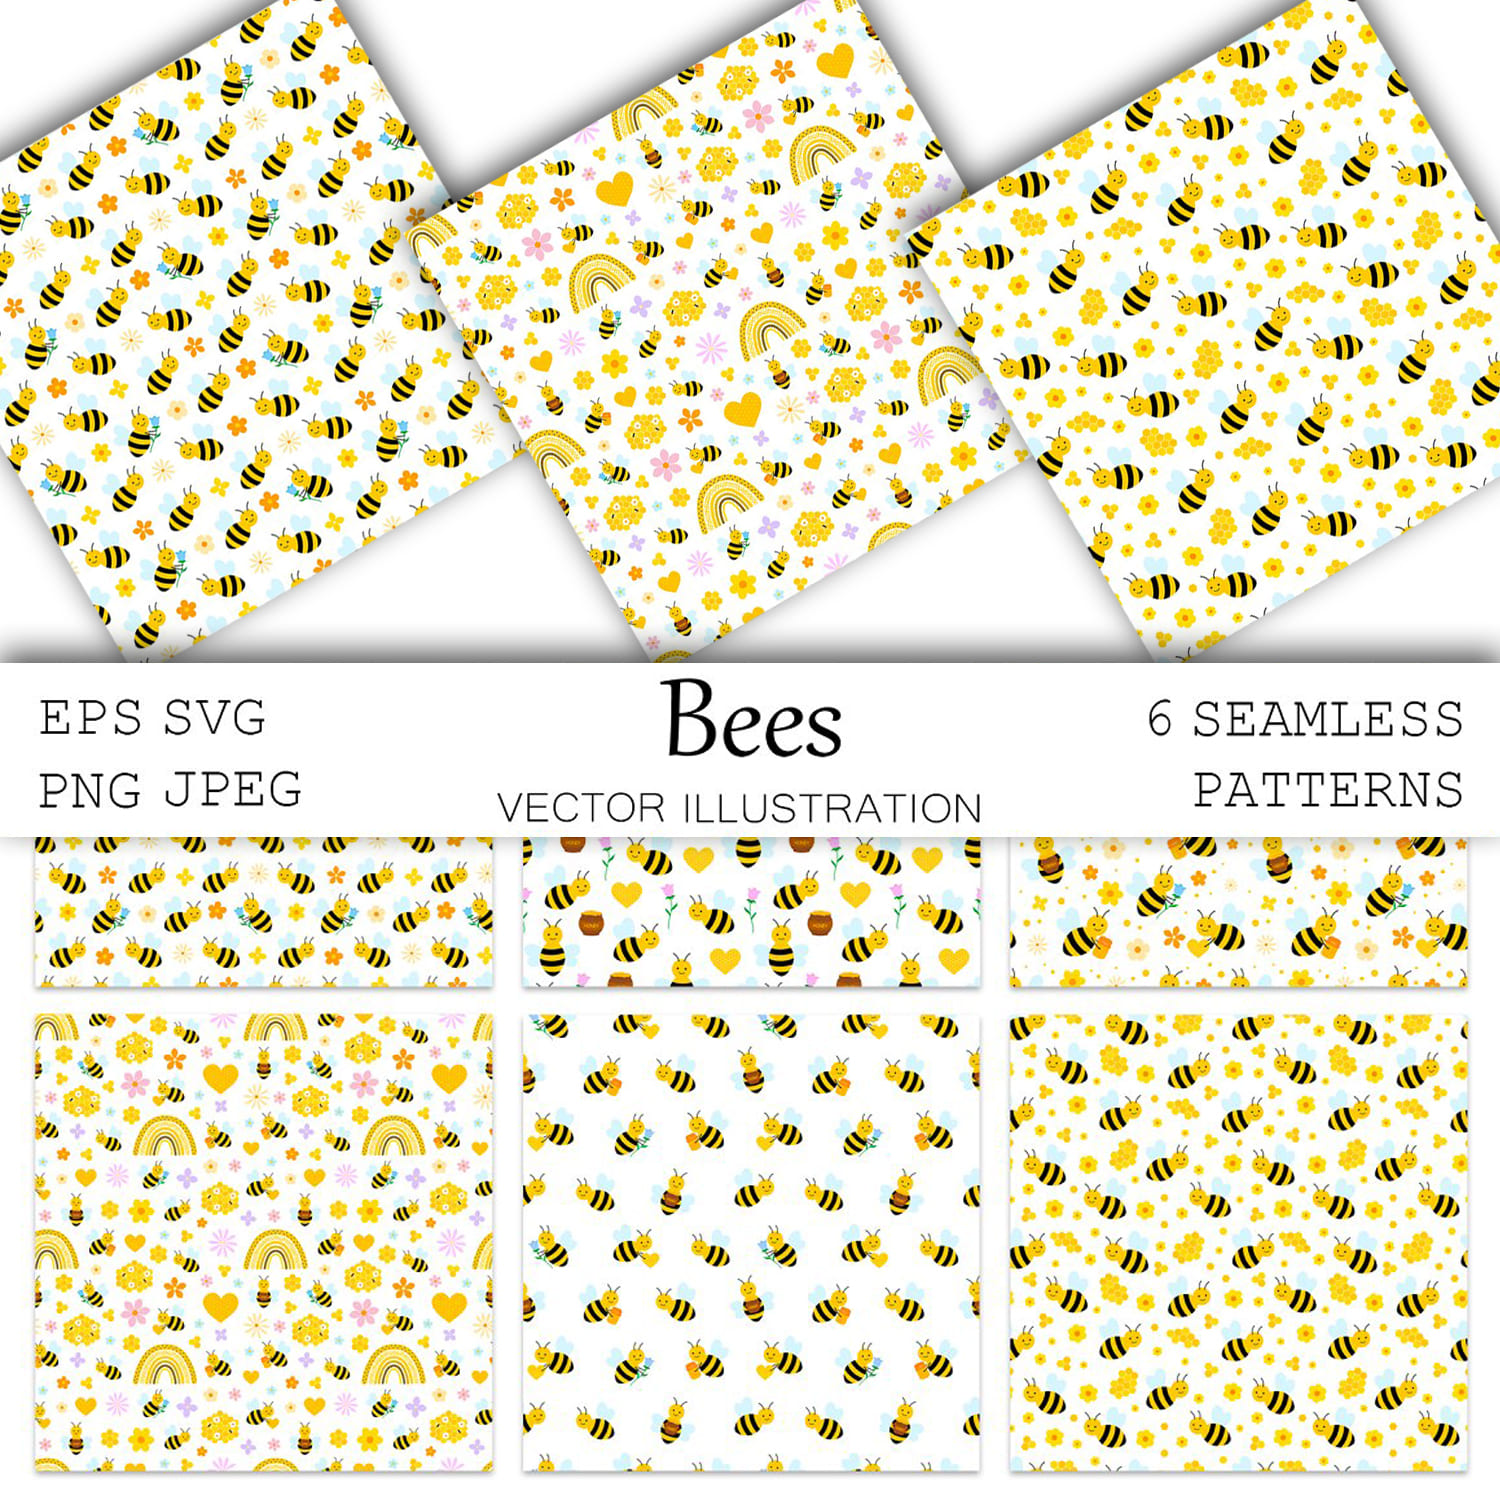 Bees pattern. Honey pattern. Bee SVG cover.